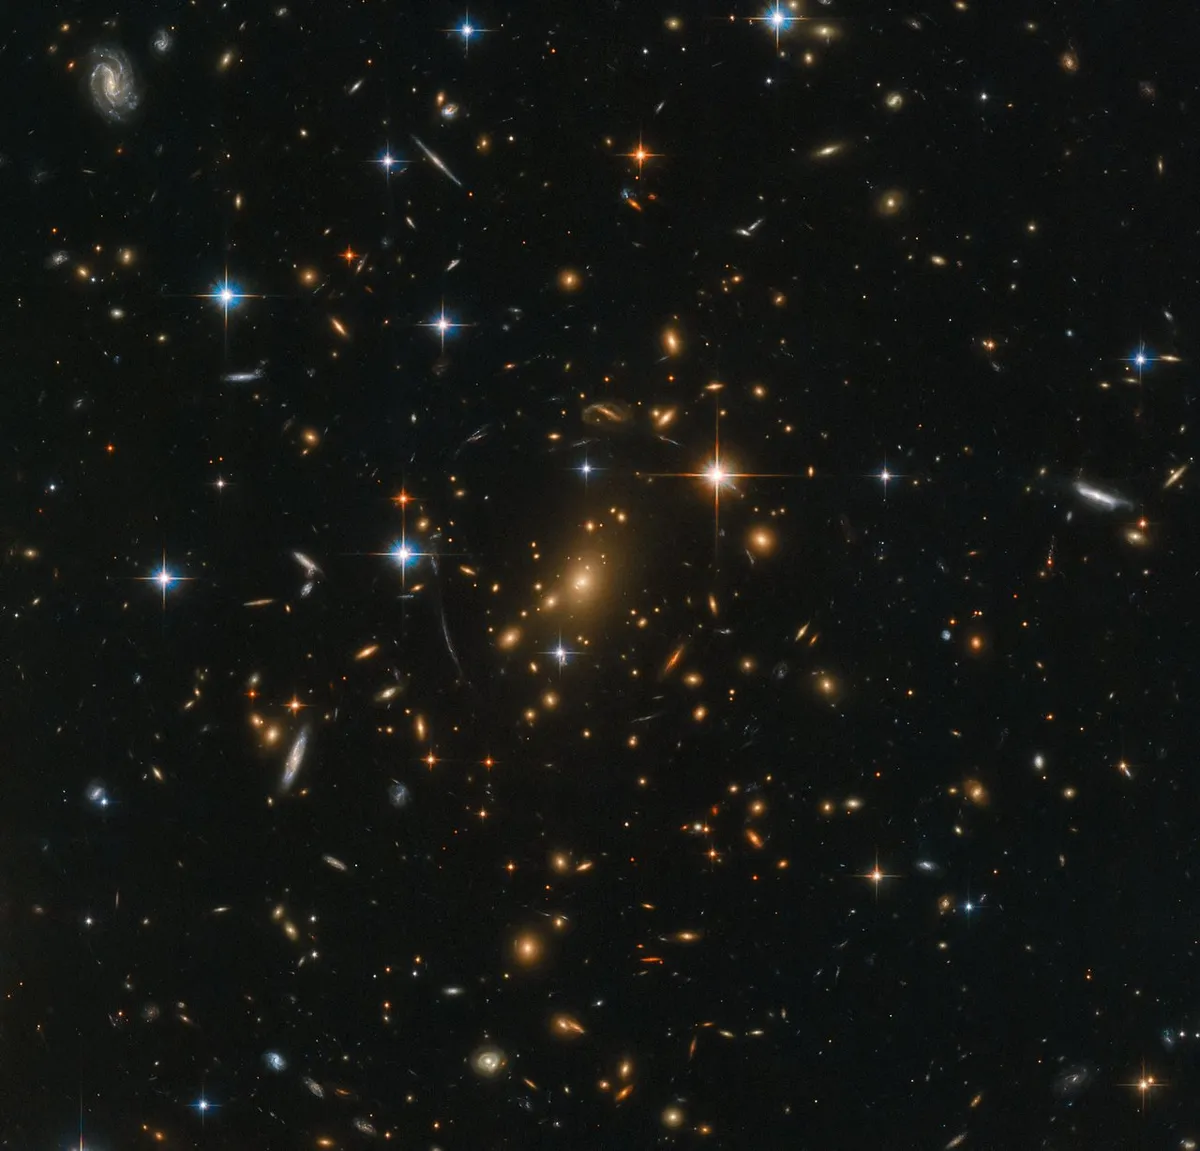 Astronomers differ over how fast the Universe is expanding